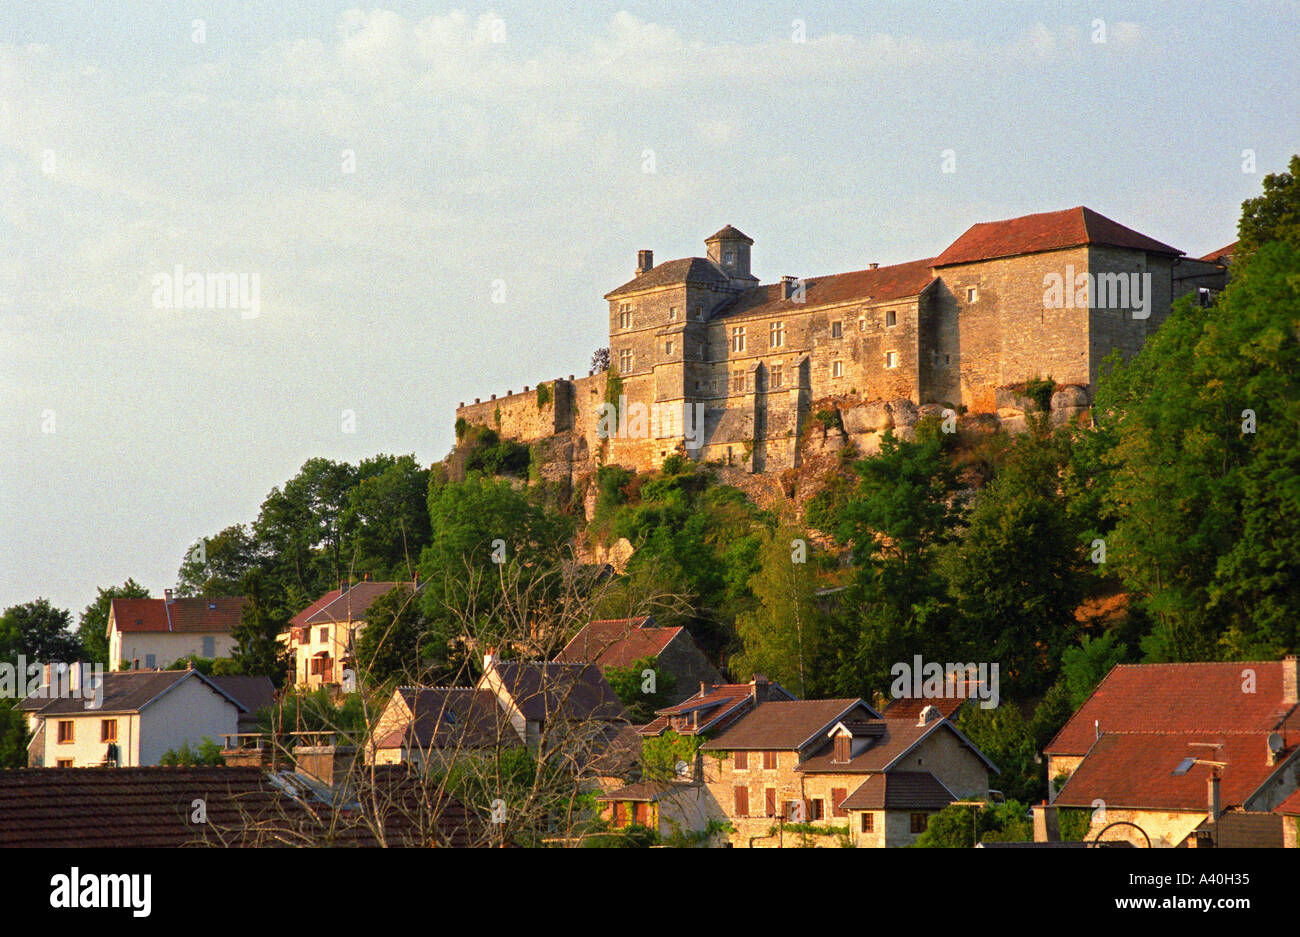 The medieval chateau de Salmaise castle / fortress in Burgundy, overlooking the village Salmaise Stock Photo